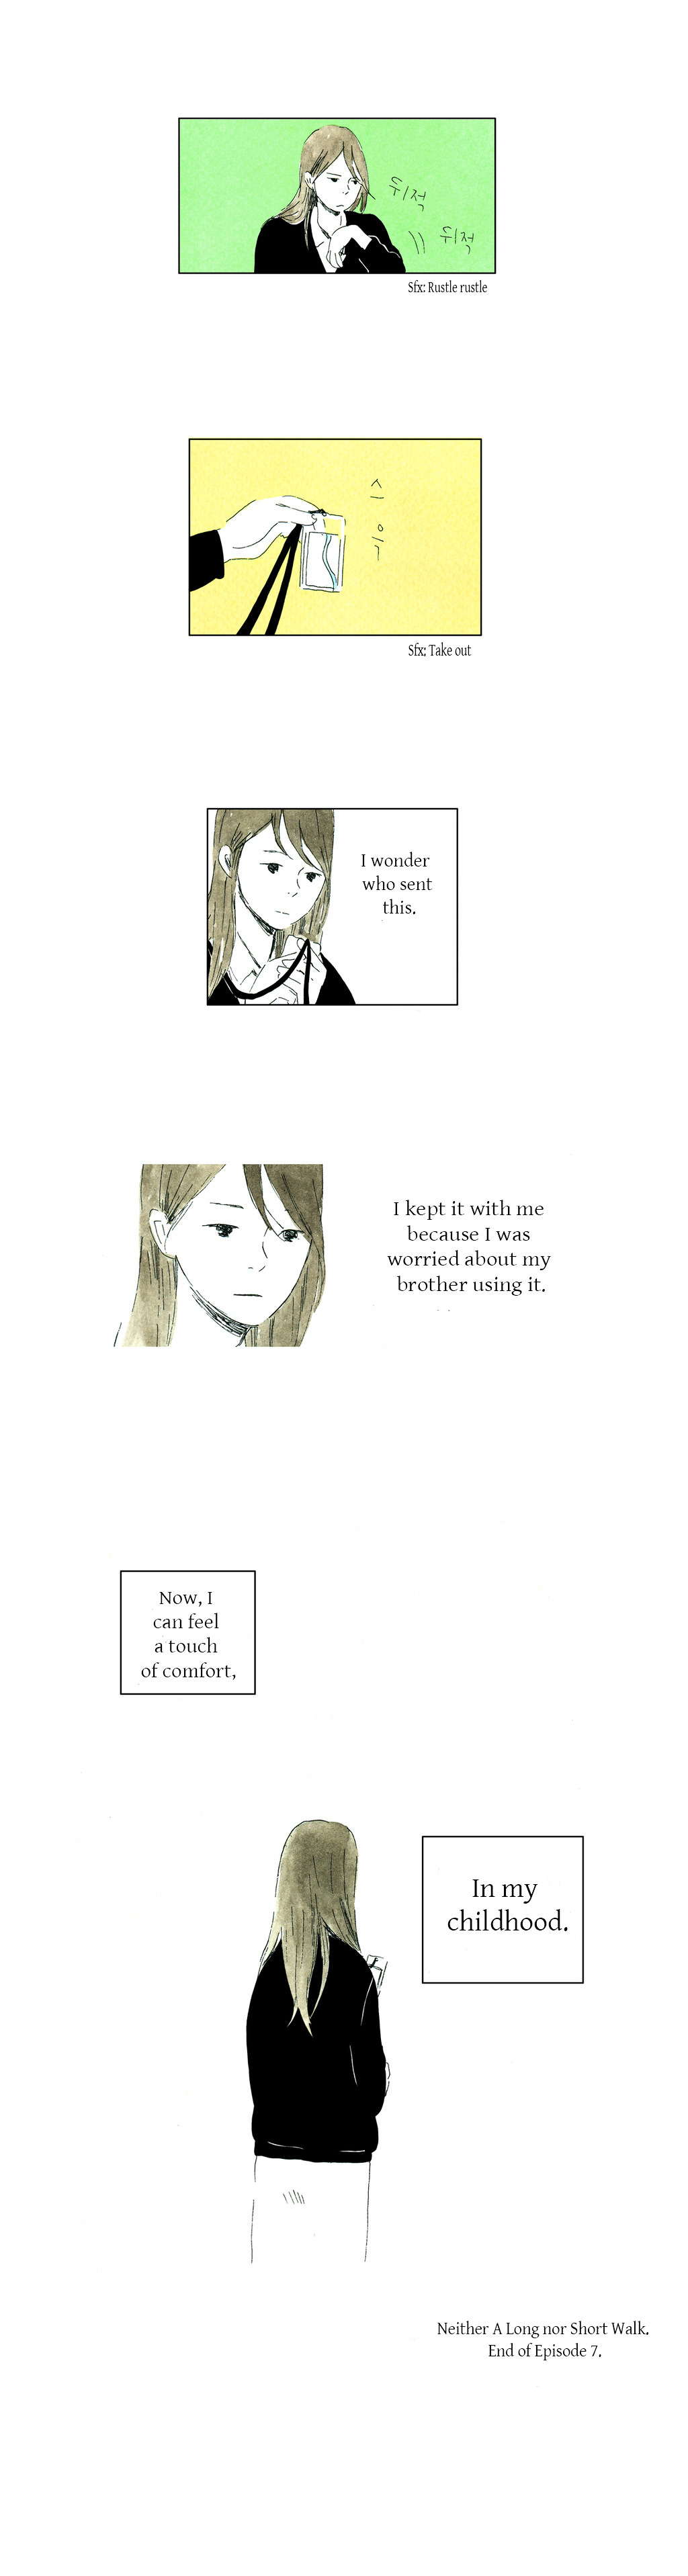 Neither A Long or Short Walk ch.7